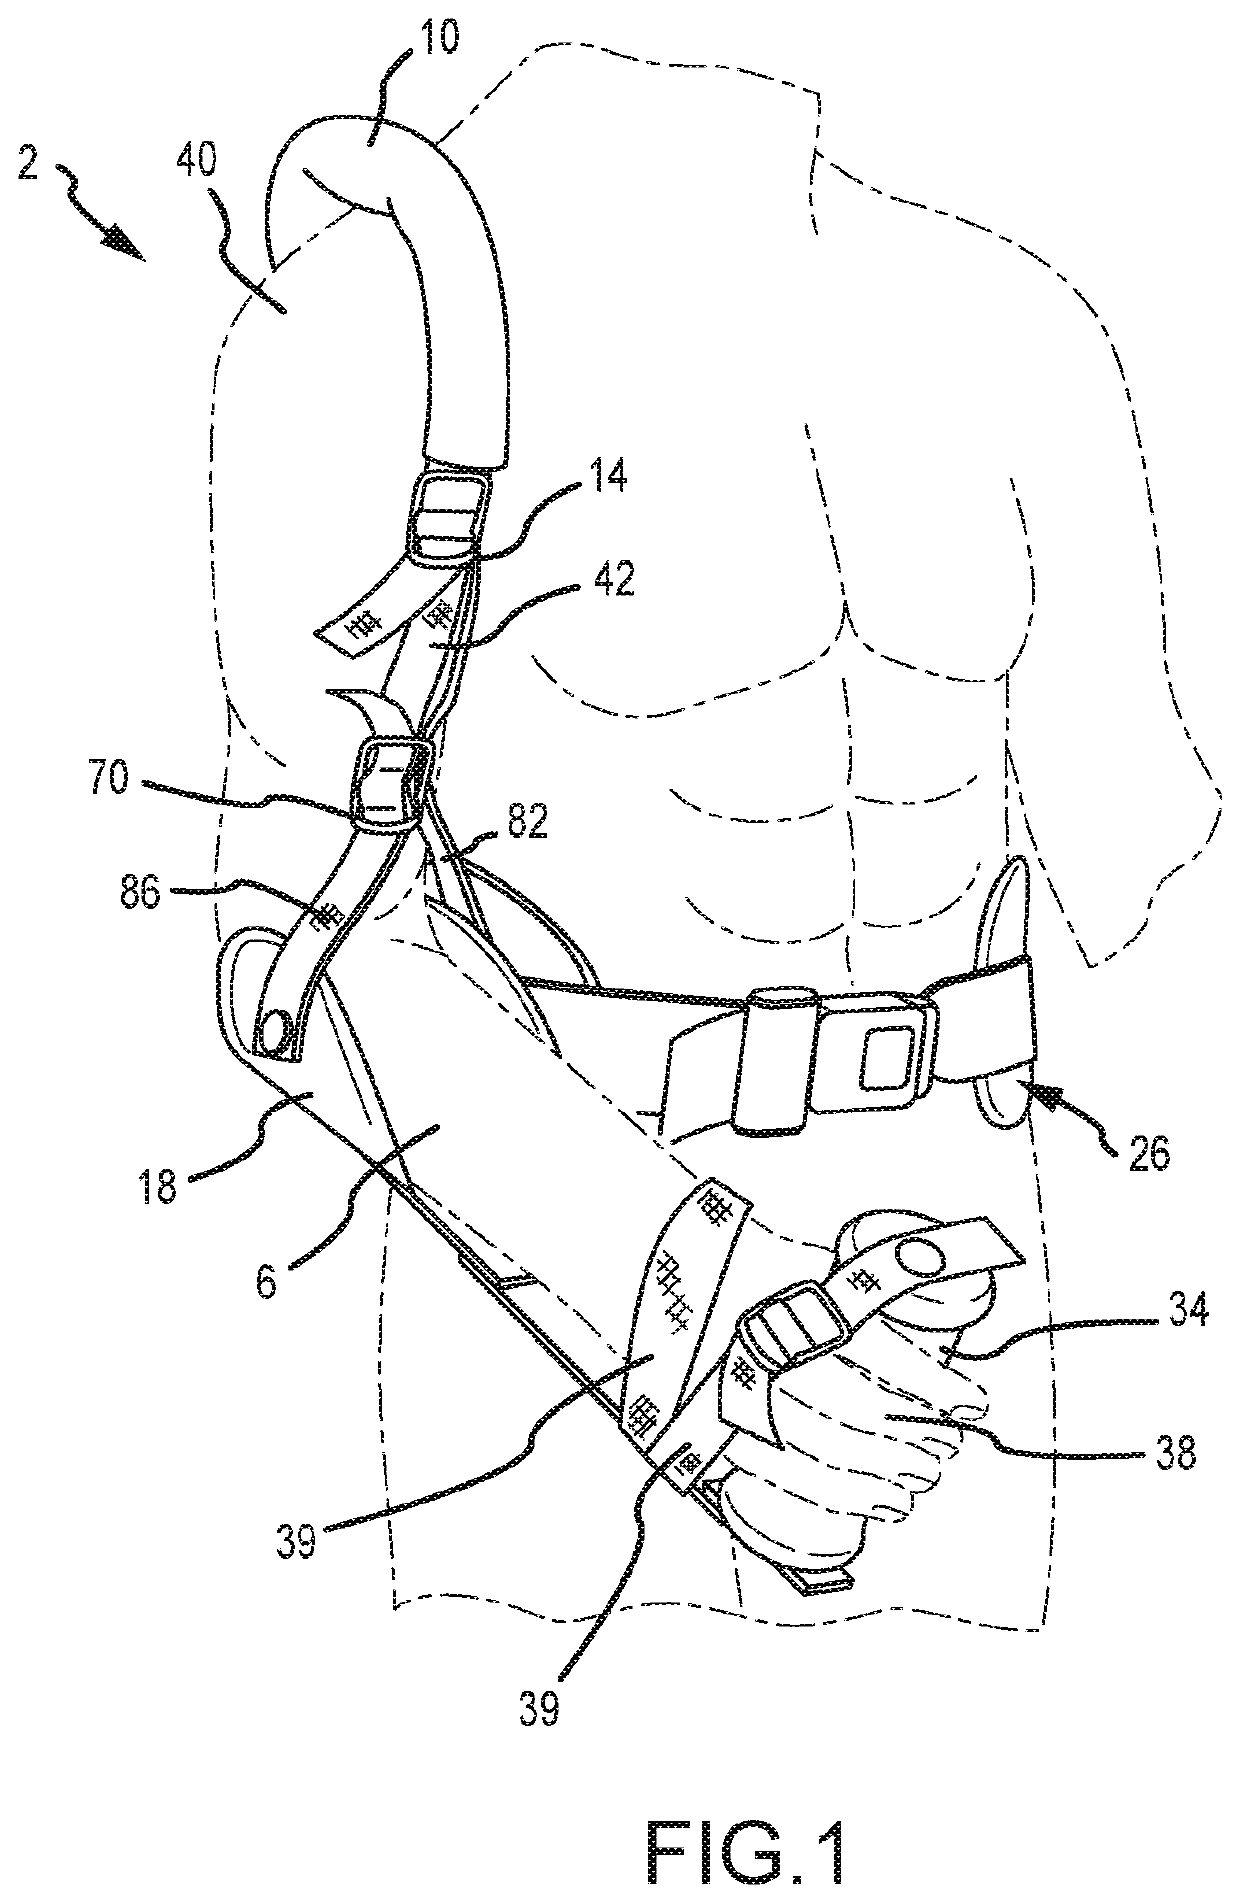 Selectively adjustable arm and shoulder support